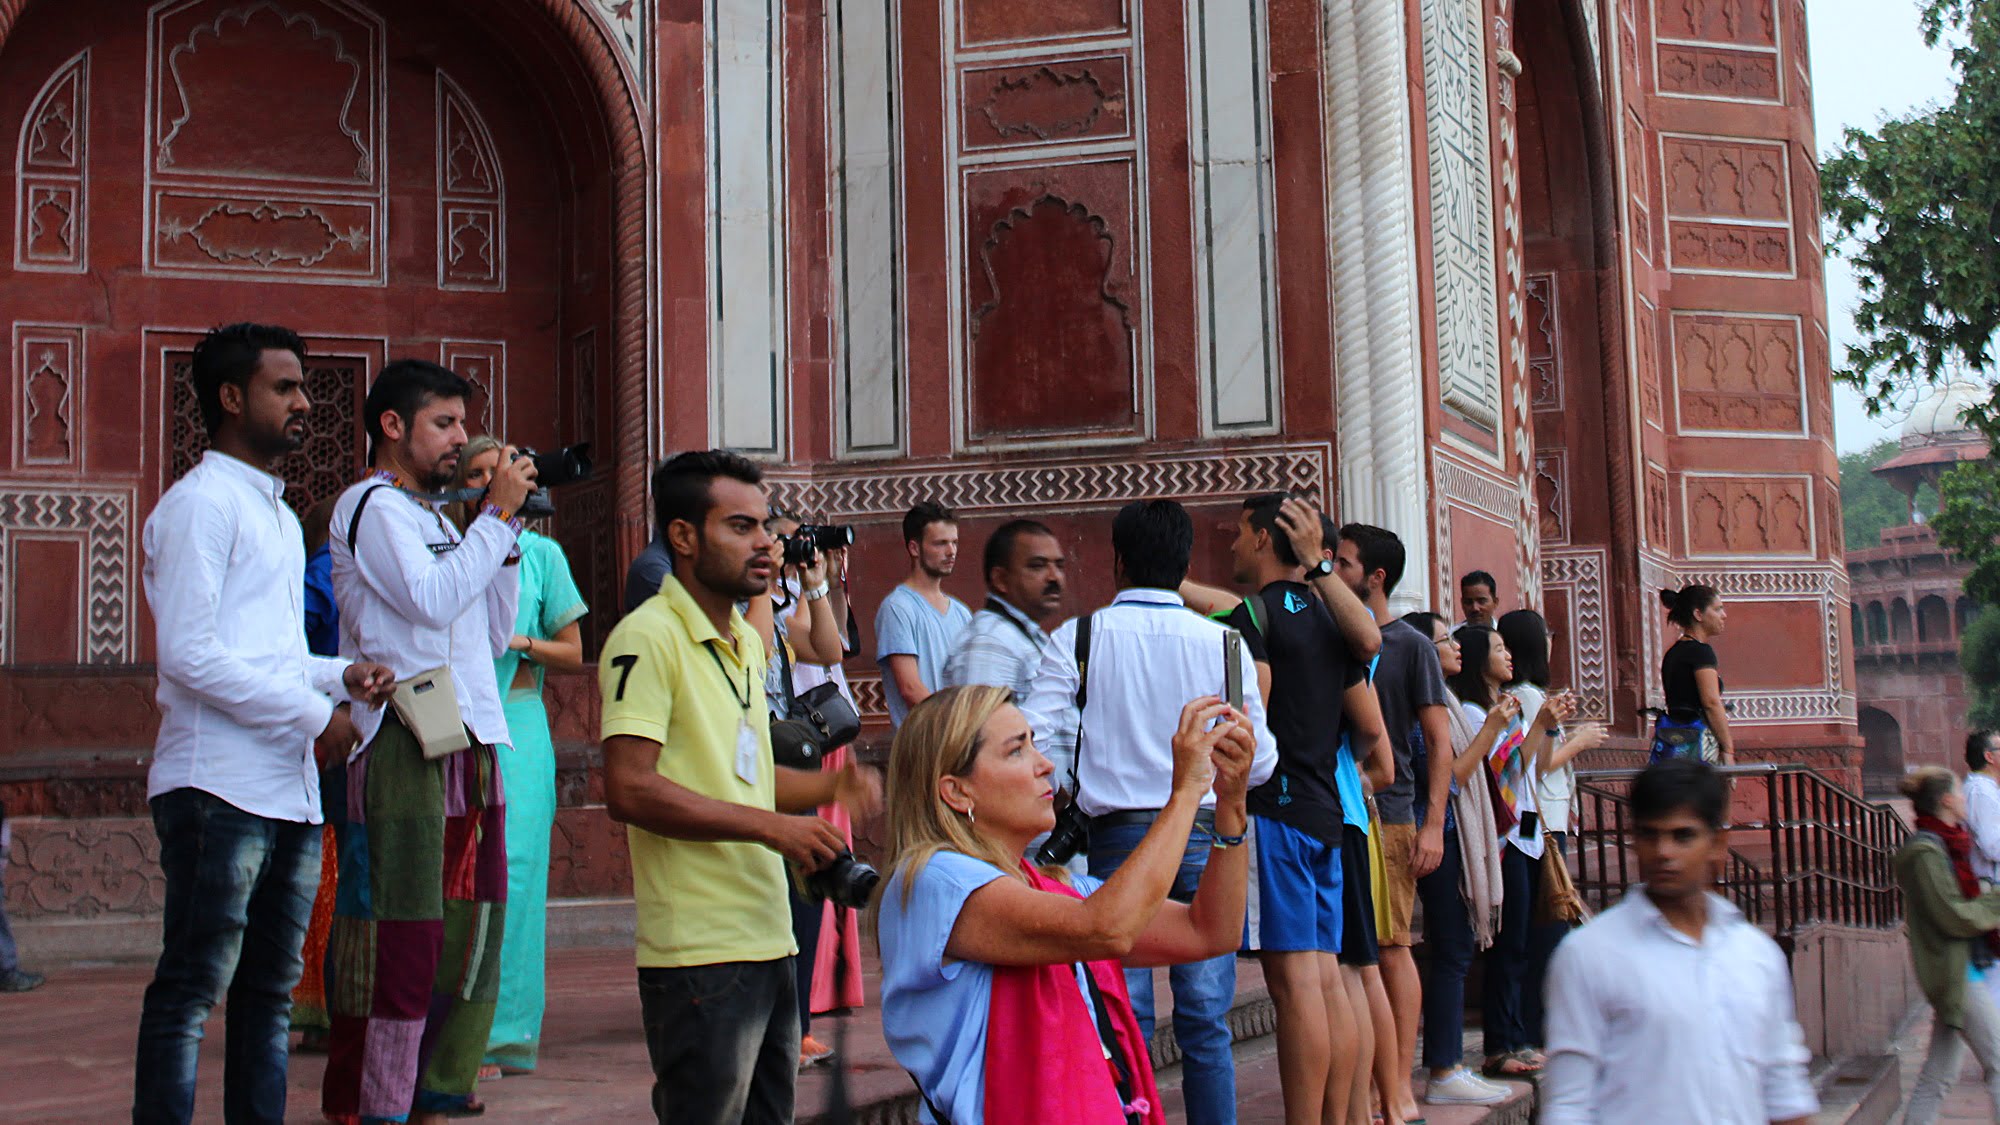 Taj Mahal Photography tips? Tourists taking pictures of Taj Mahal early in the morning.